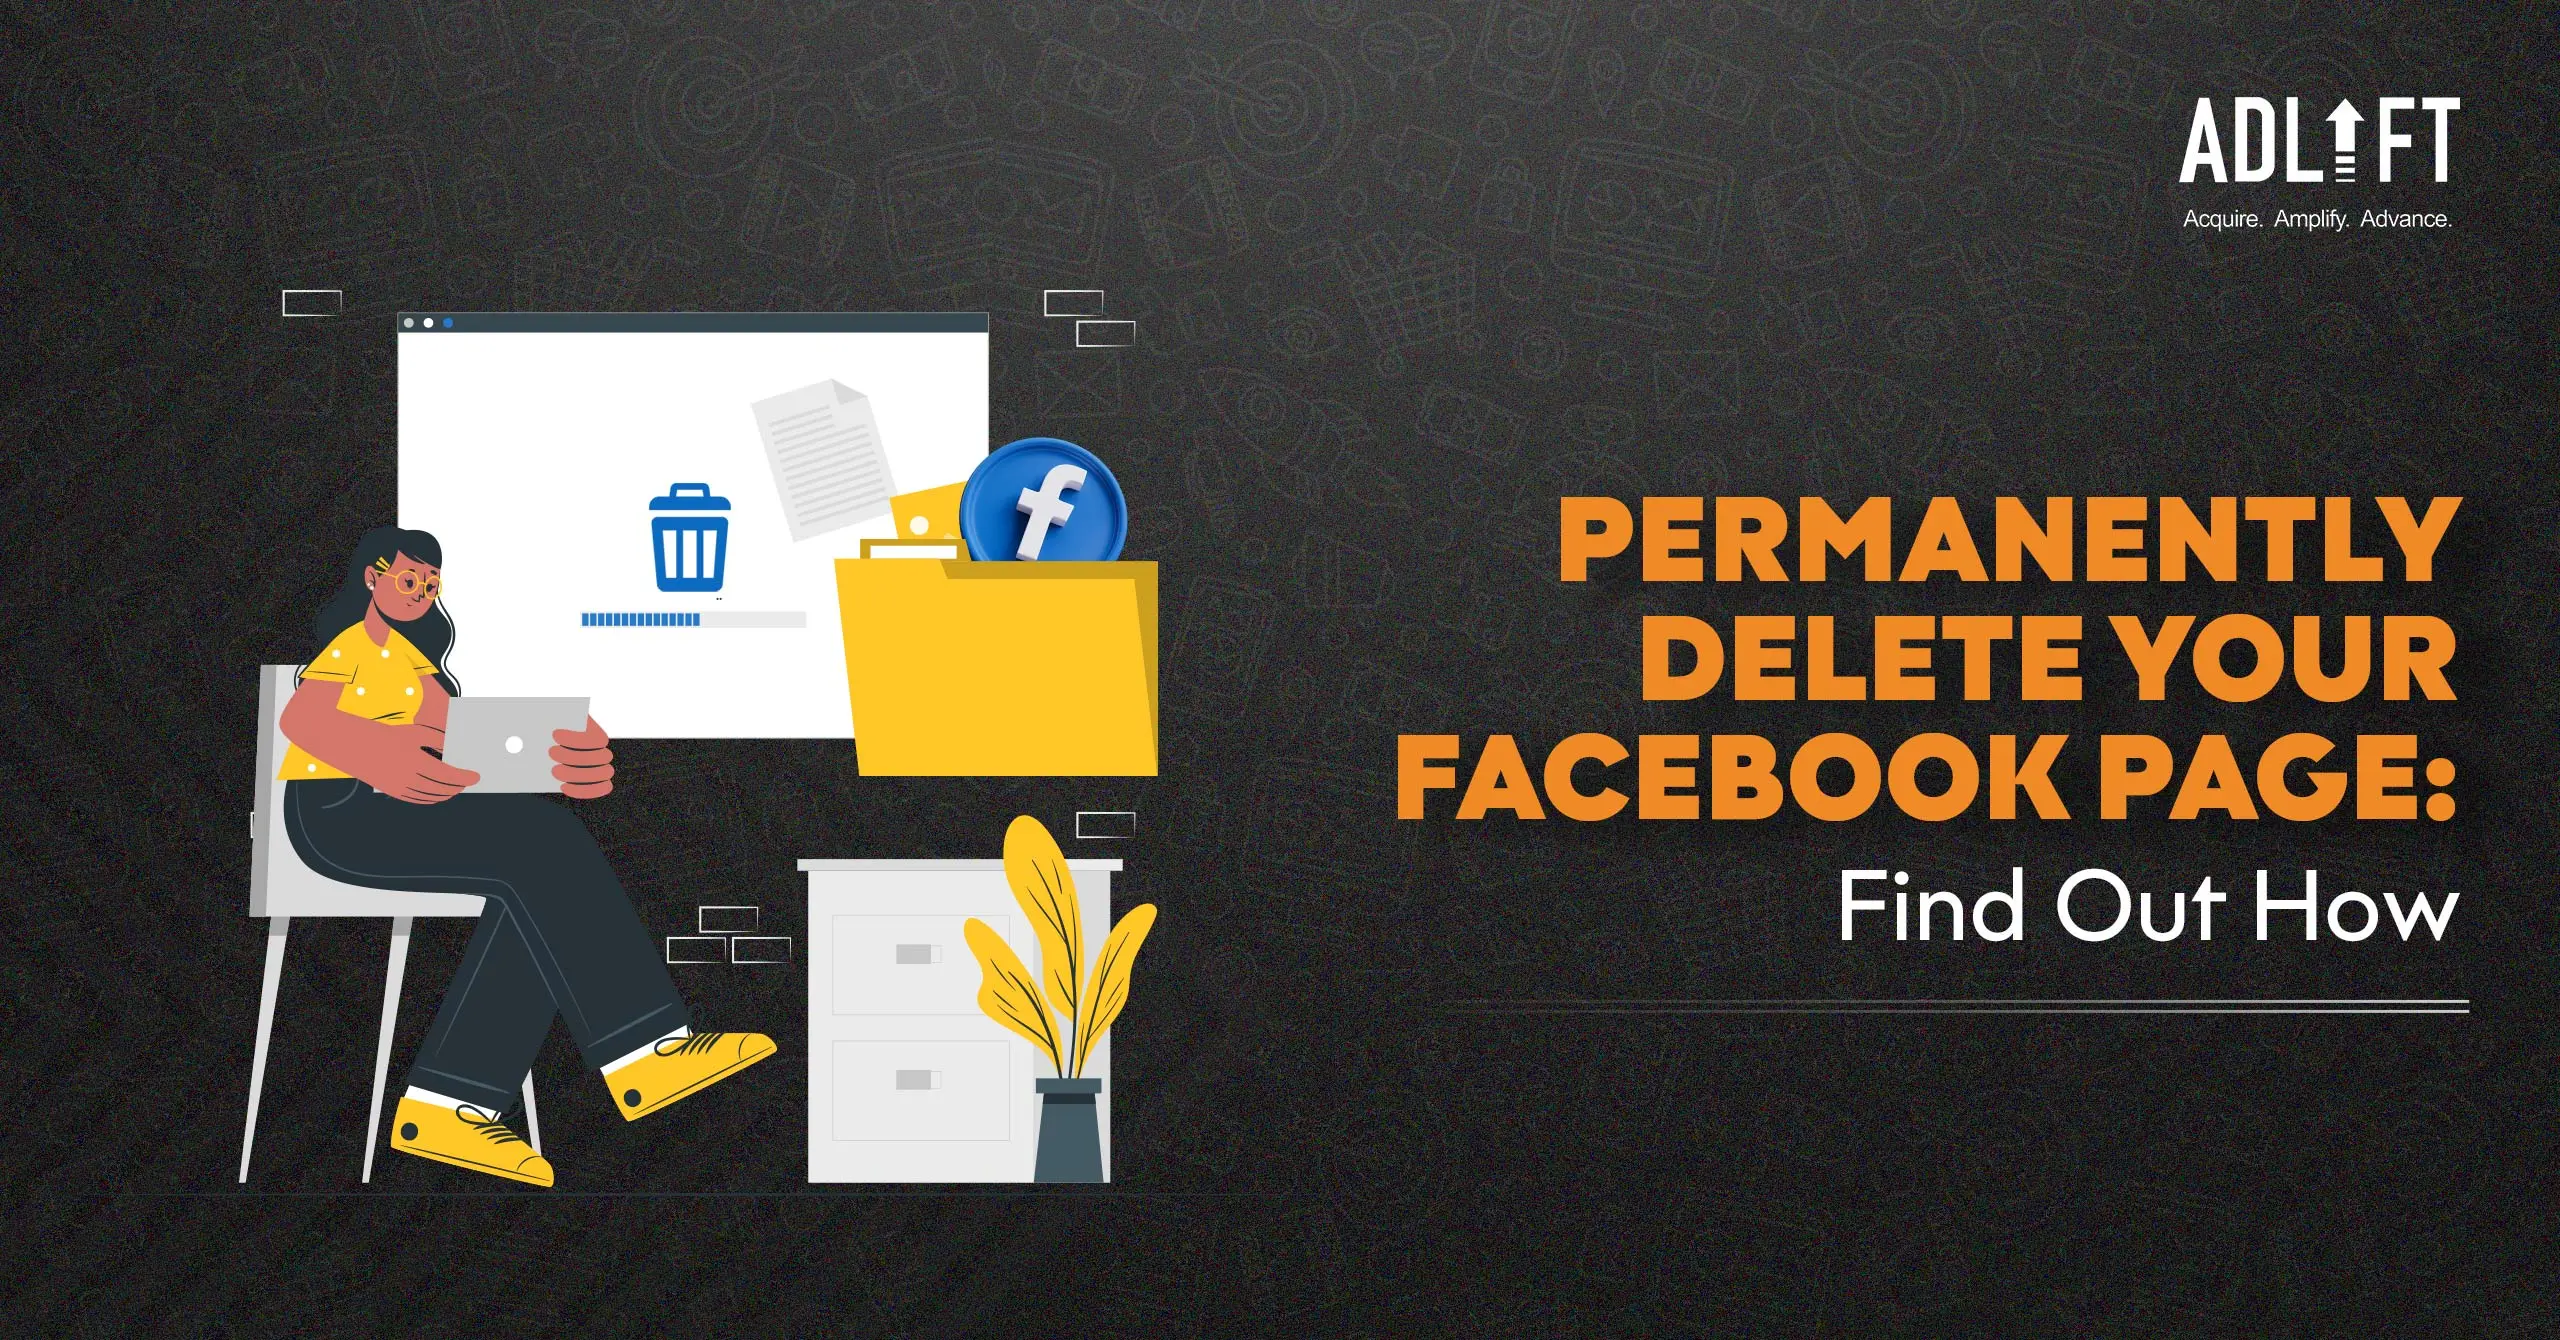 How to Delete Facebook Page: Step by Step Guide